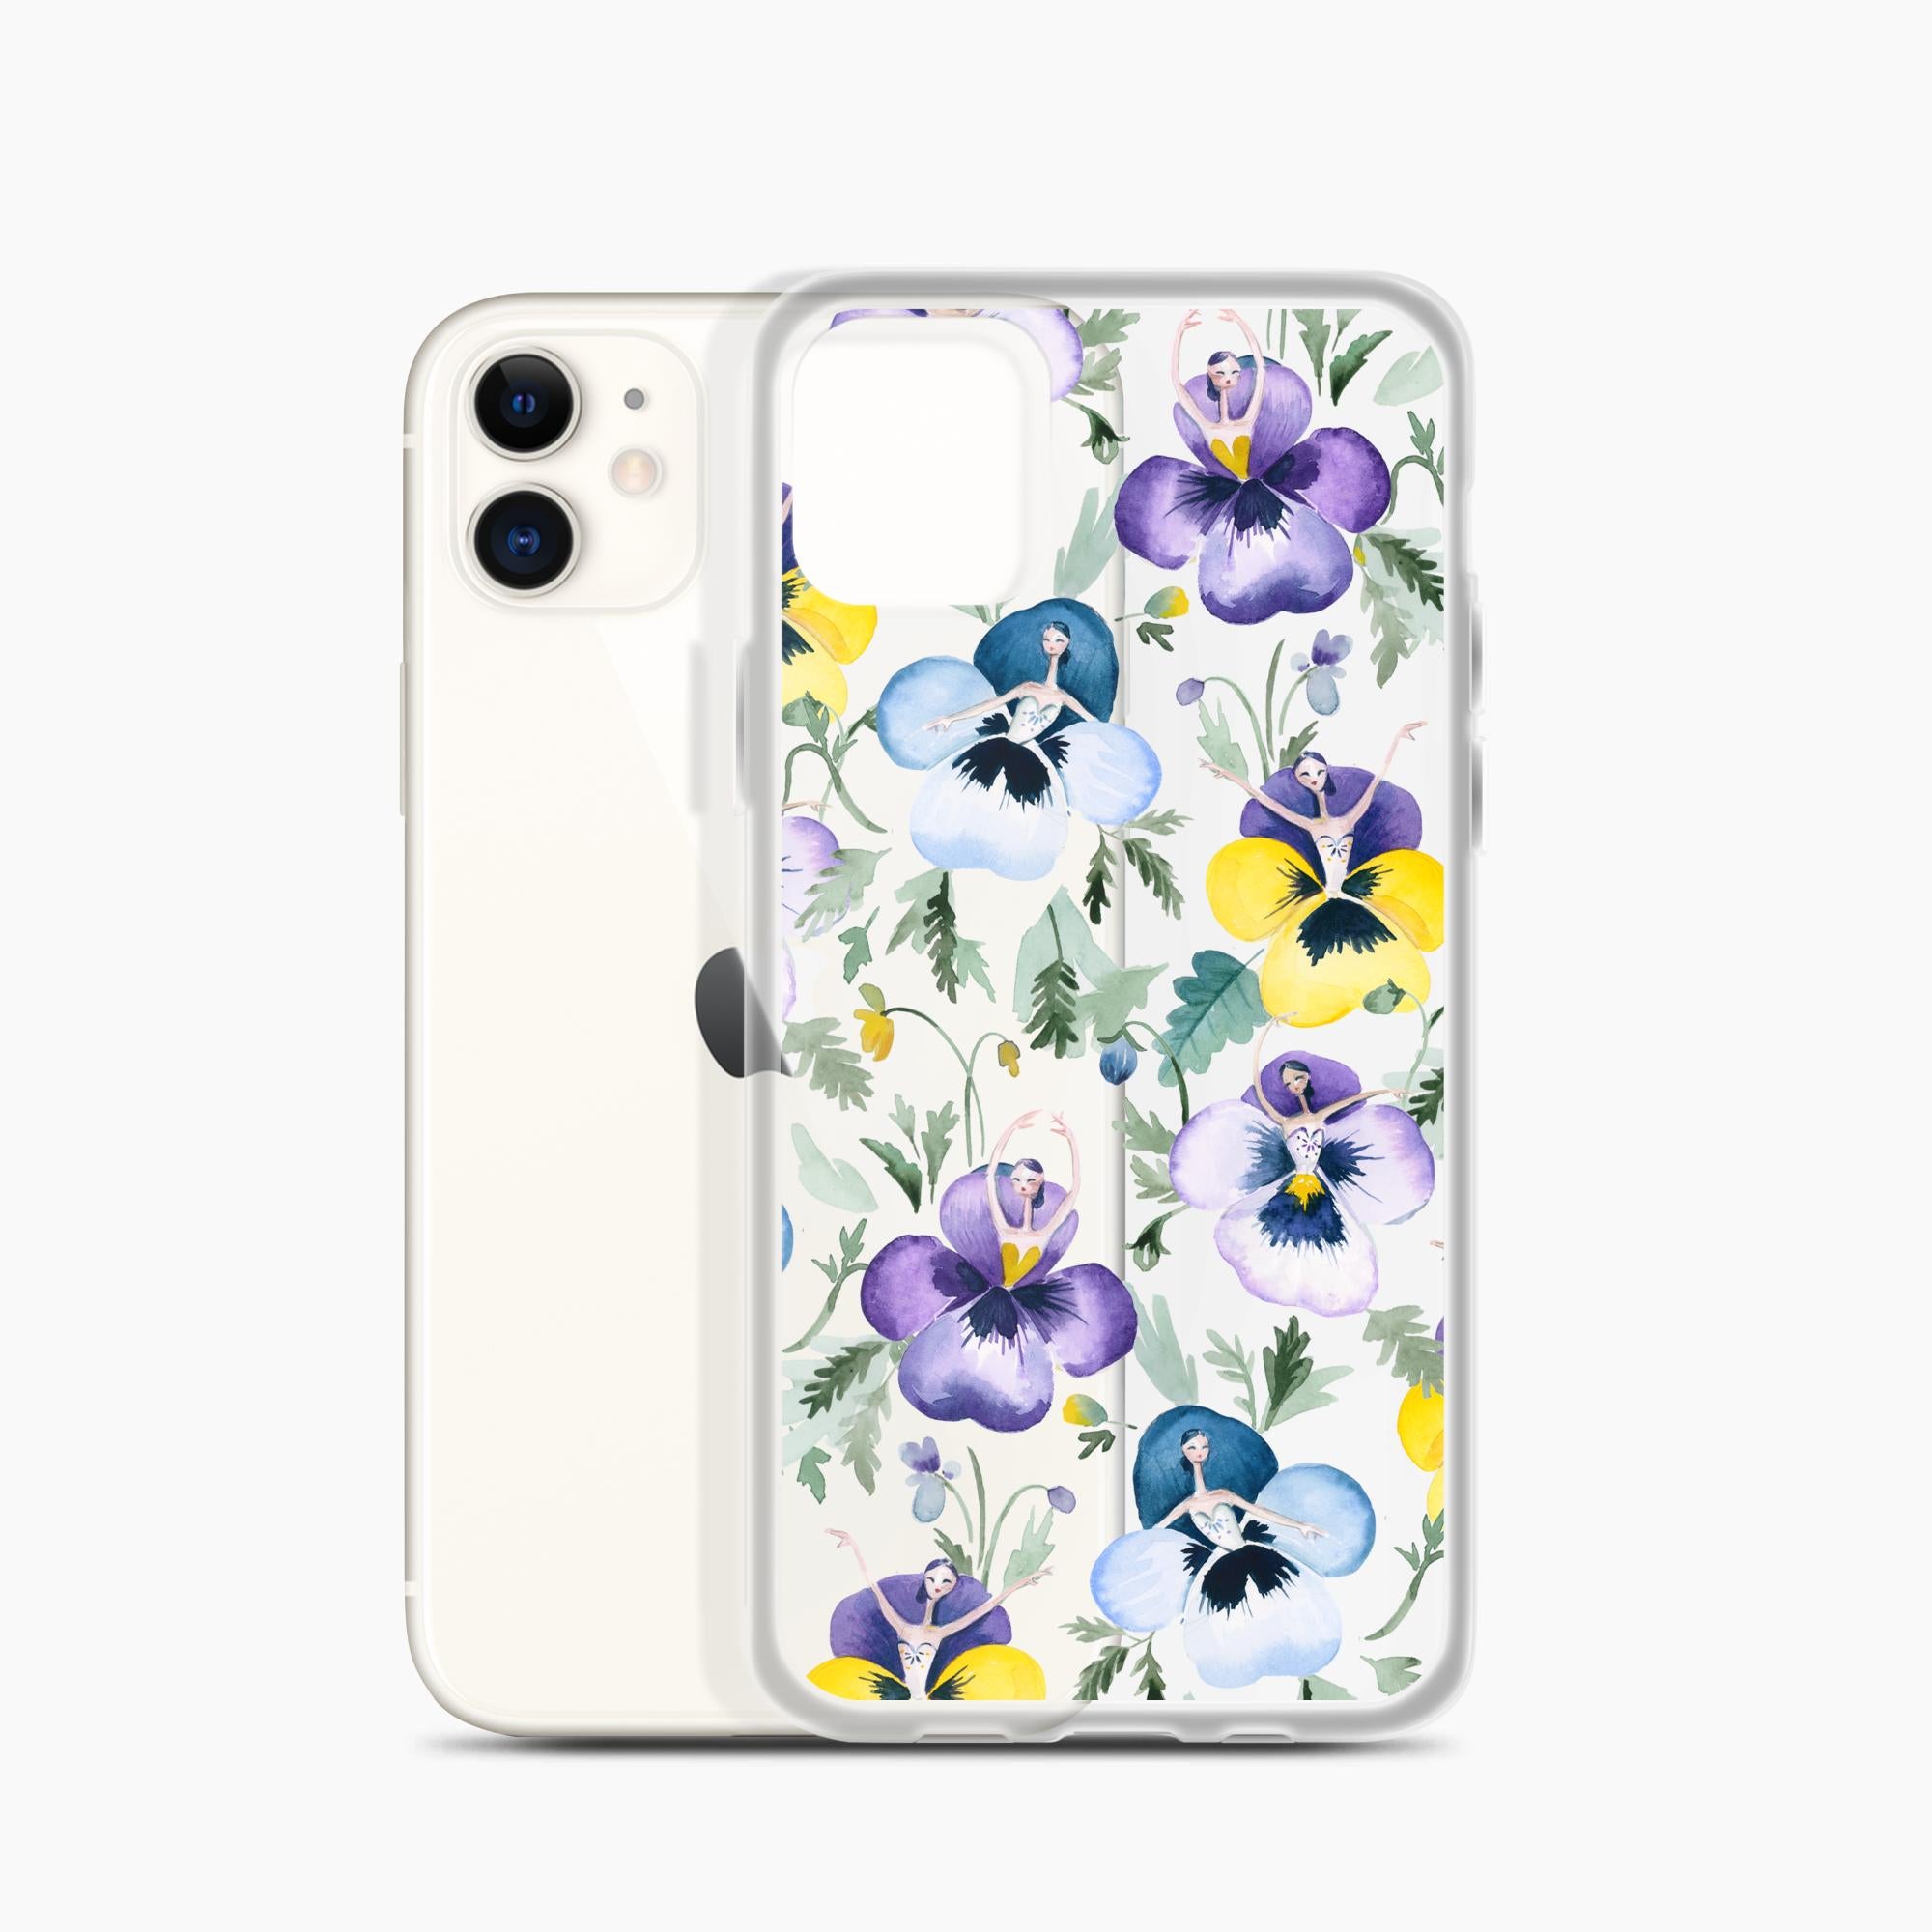 Waltz of the Pansies iPhone Case